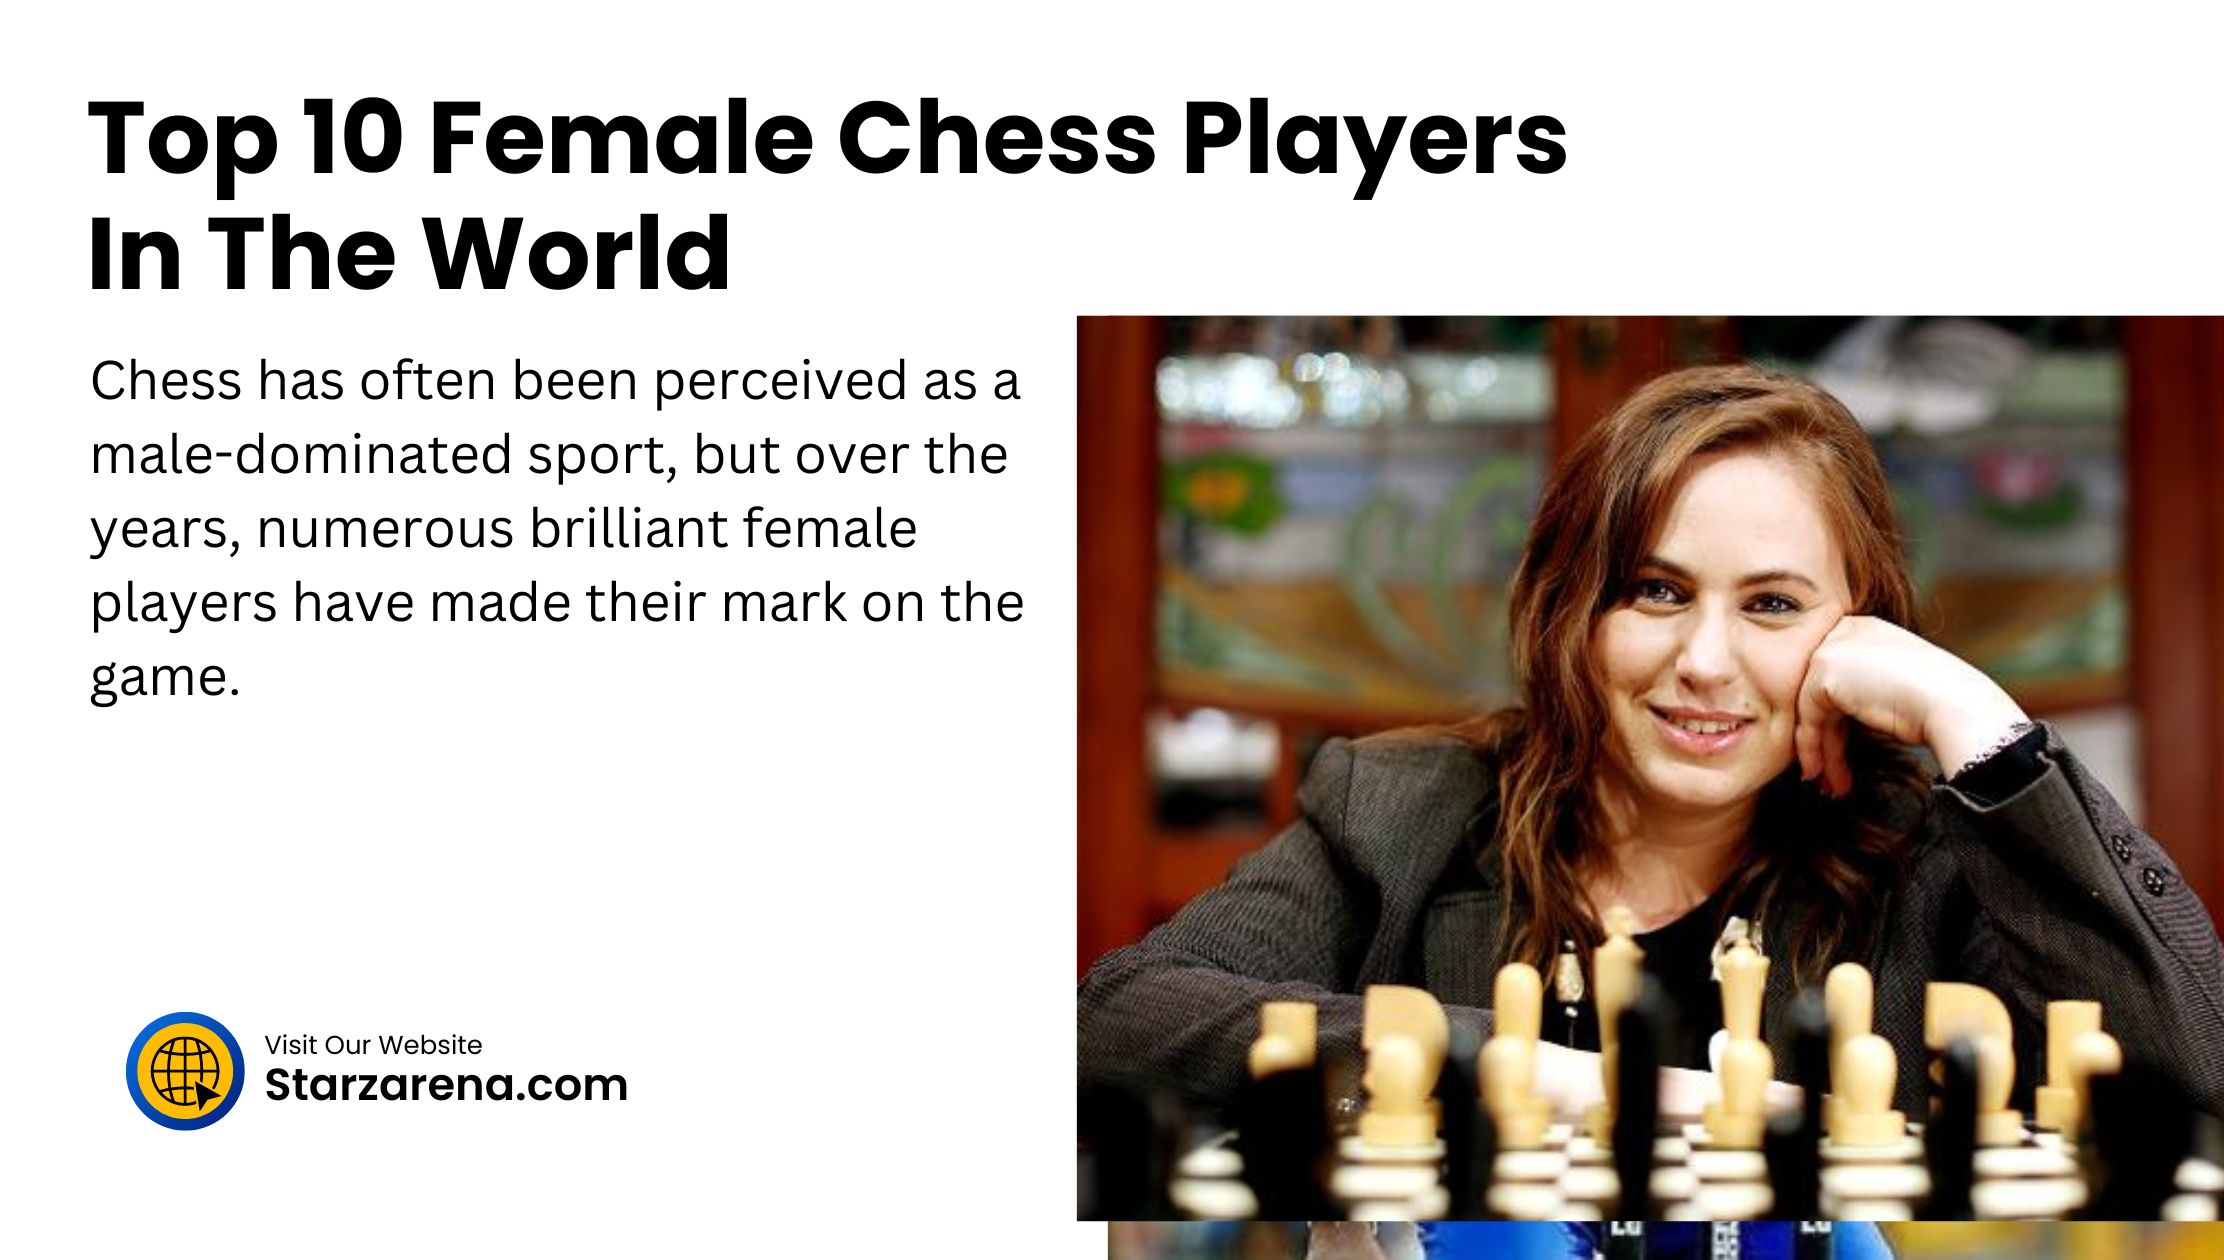 Top 10 Female Chess Players